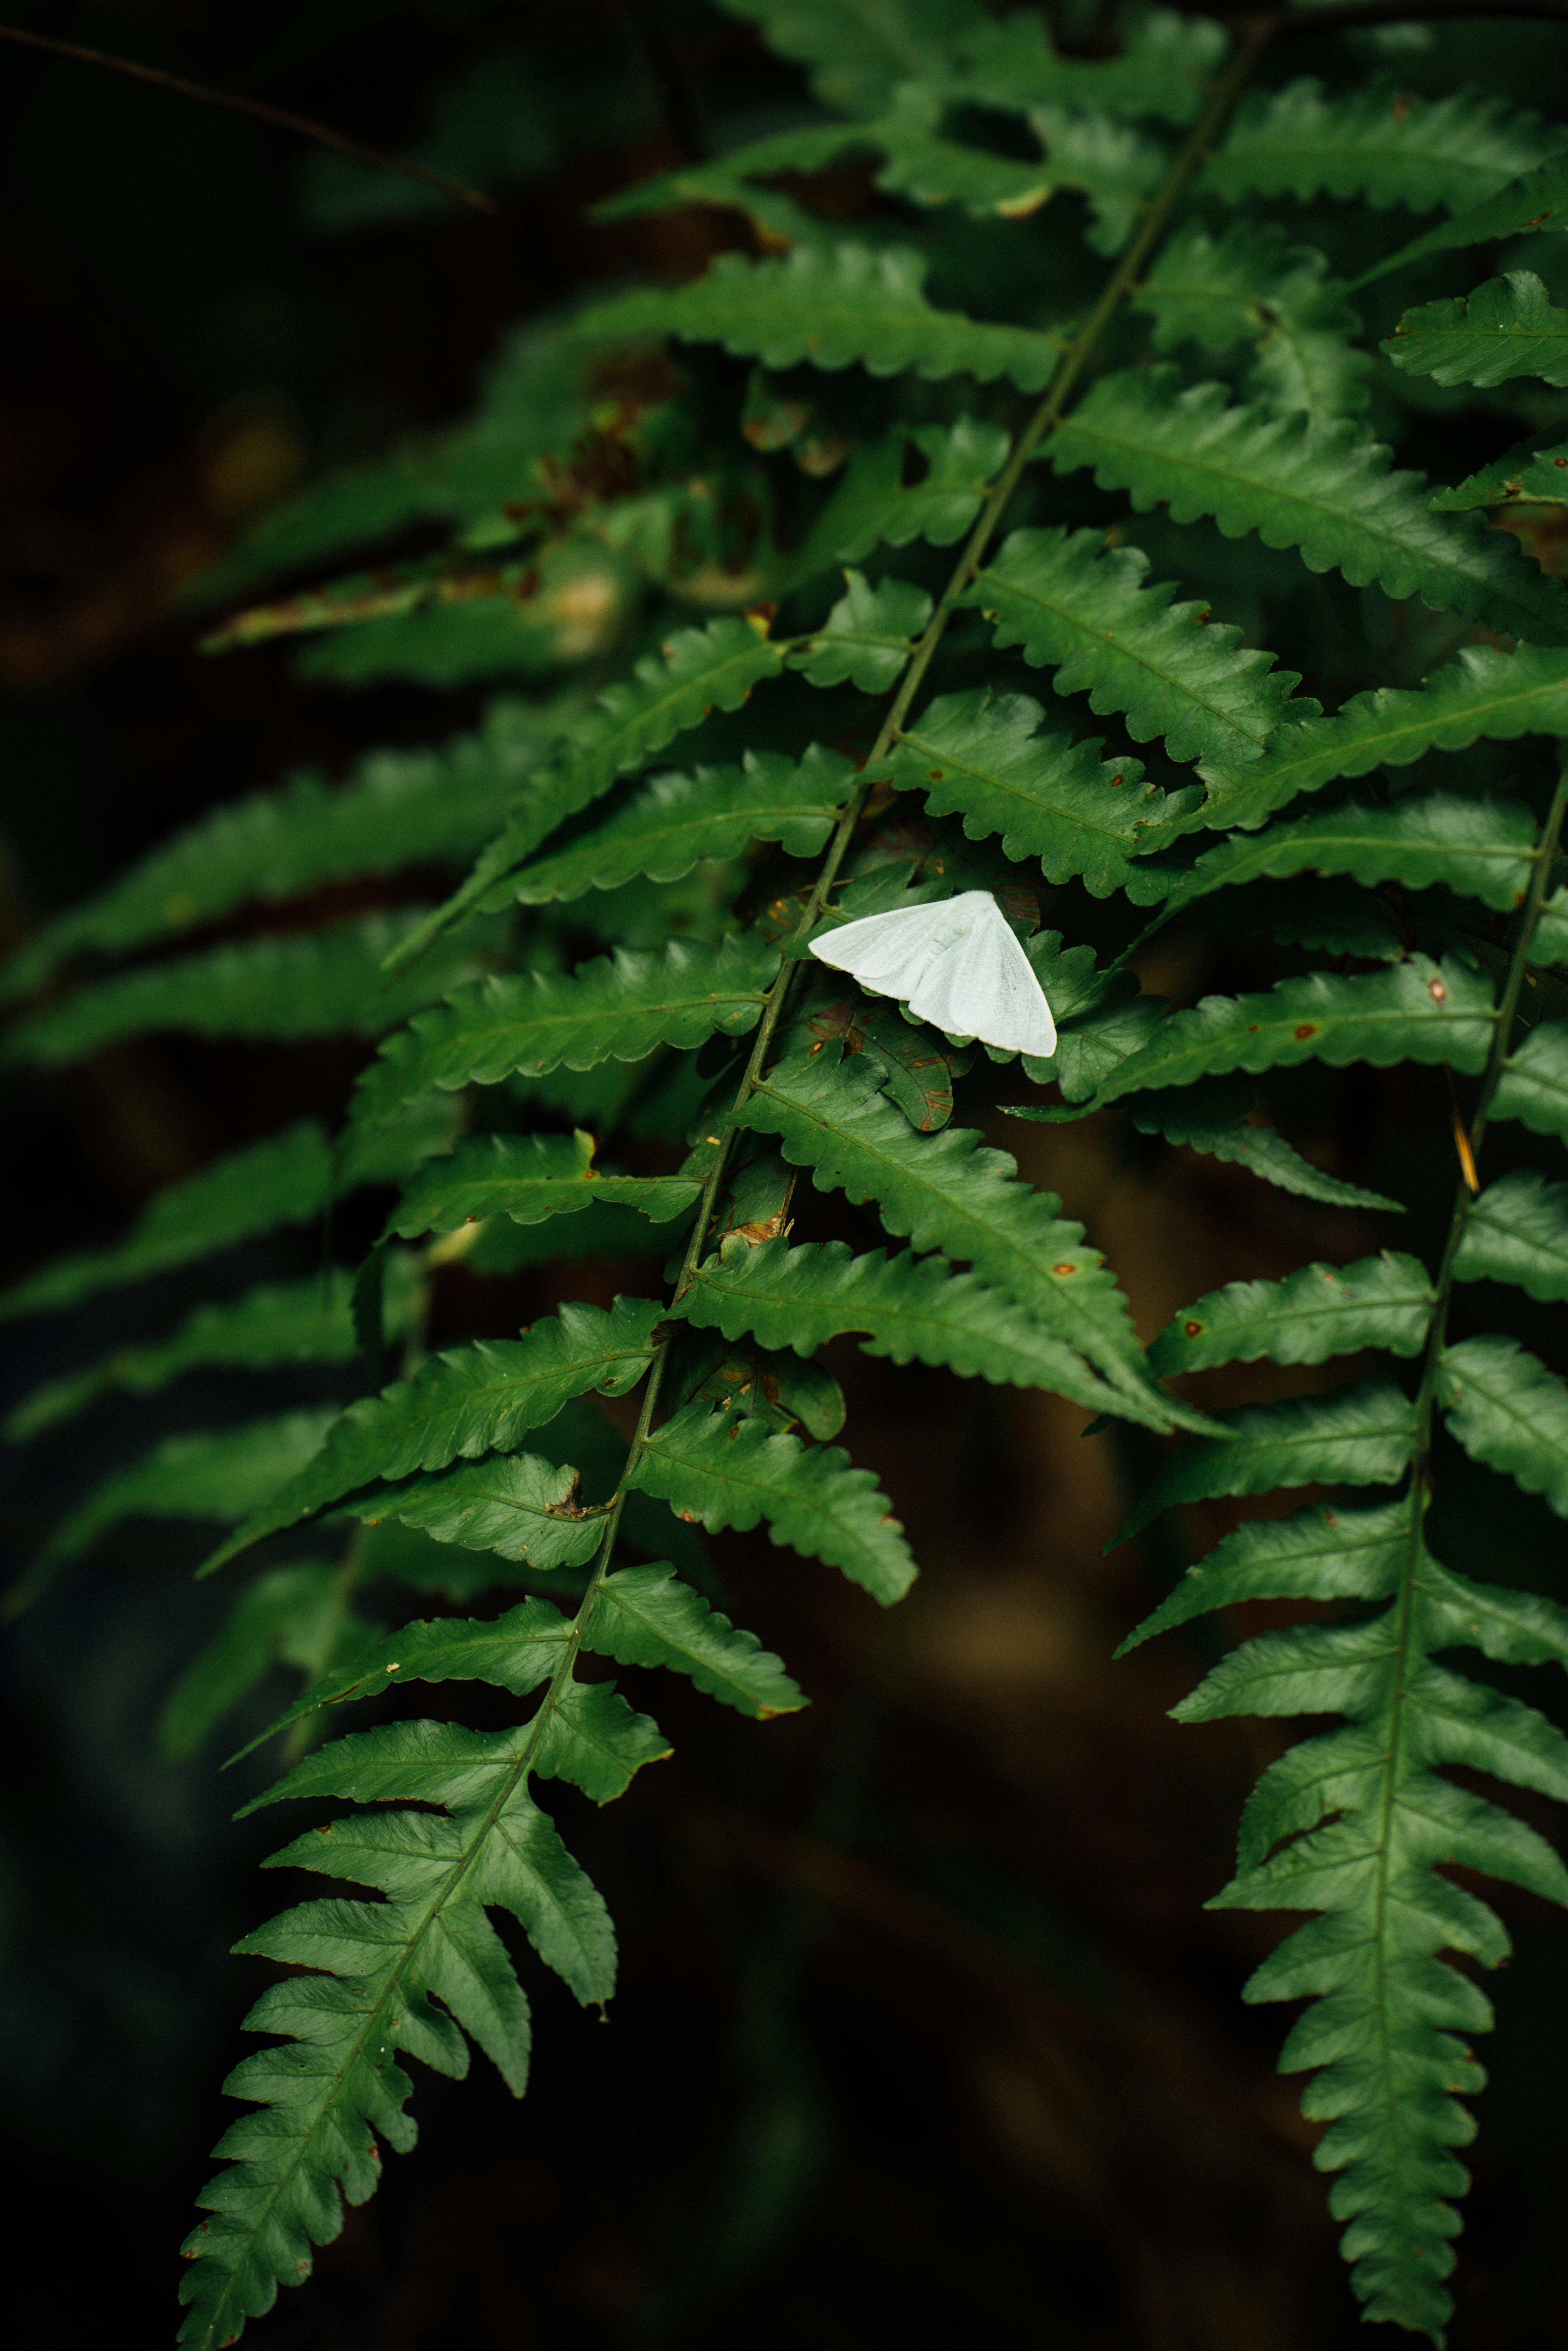 free-photo-of-a-white-paper-airplane-is-sitting-on-a-fern-leaf.jpeg